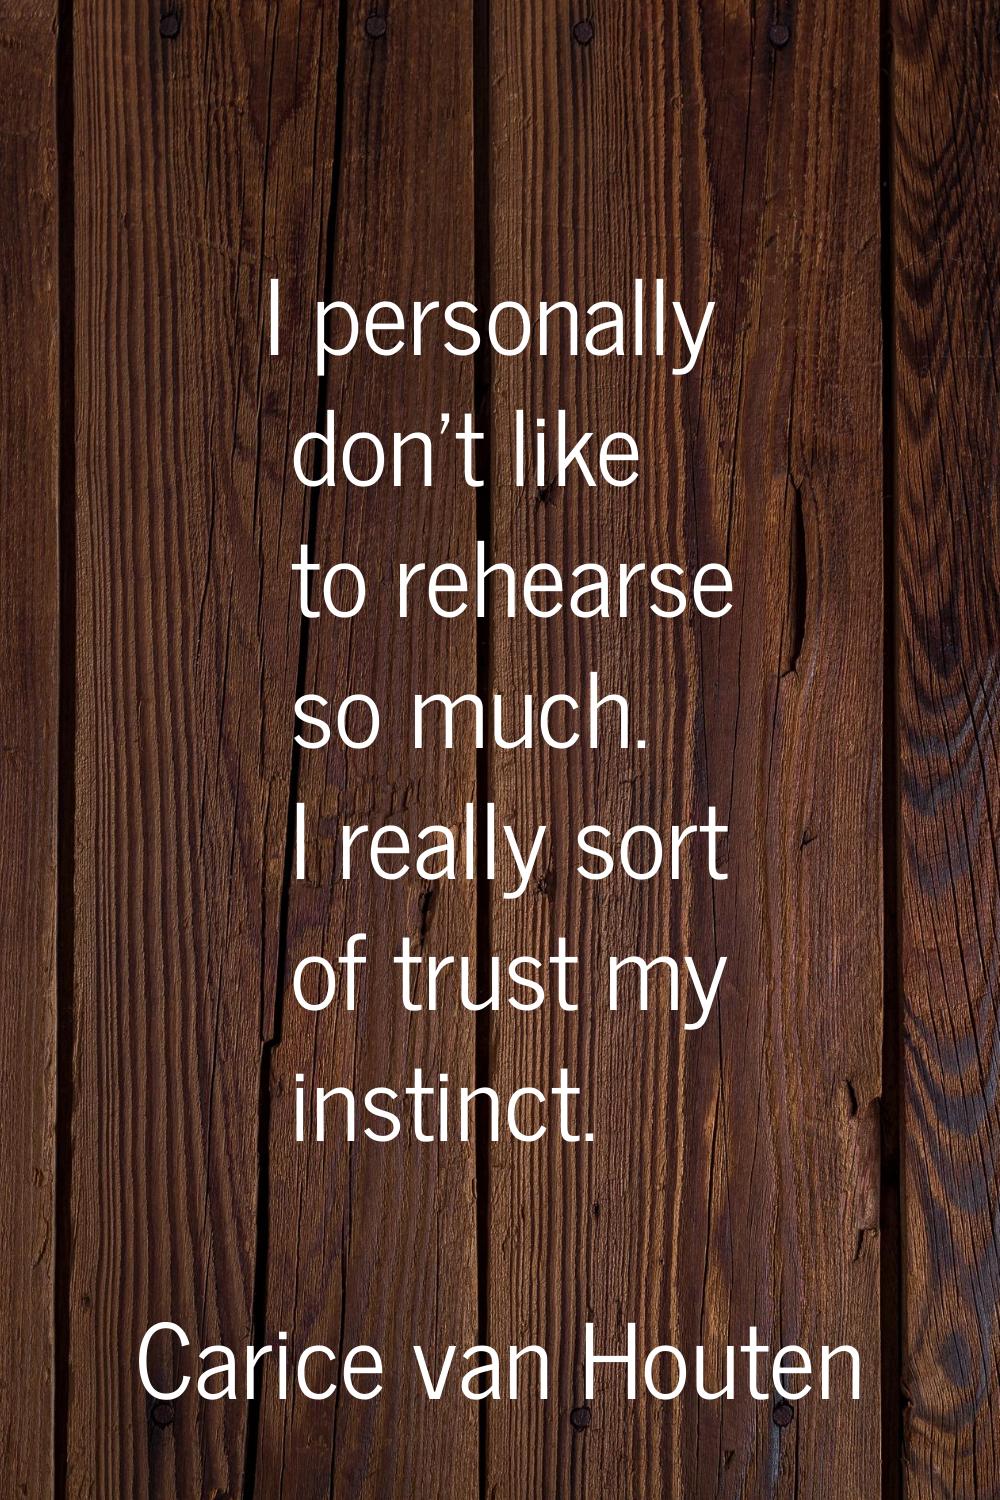 I personally don't like to rehearse so much. I really sort of trust my instinct.